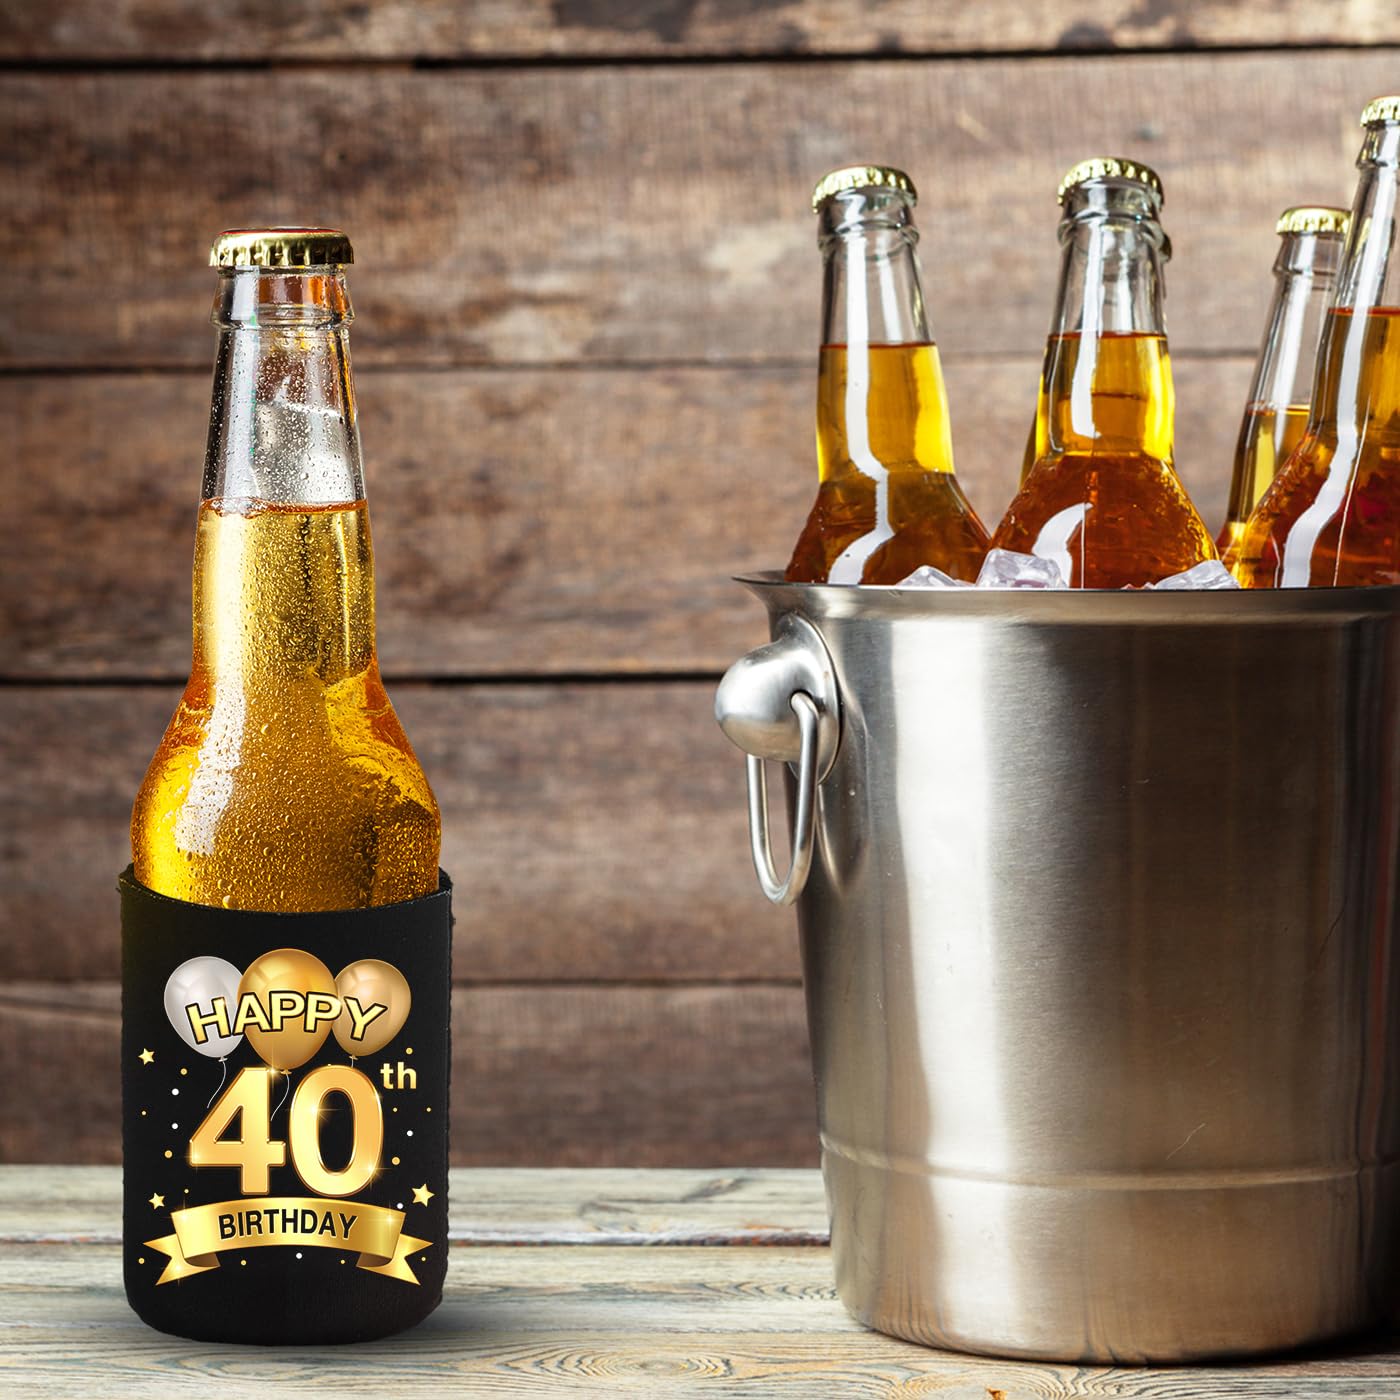 Greatingreat 40th Birthday Can Cooler Sleeves Pack of 12-40th Anniversary Decorations- Vintage 1984-40th Birthday Party Supplies - Black and Gold Fortieth Birthday Cup Coolers